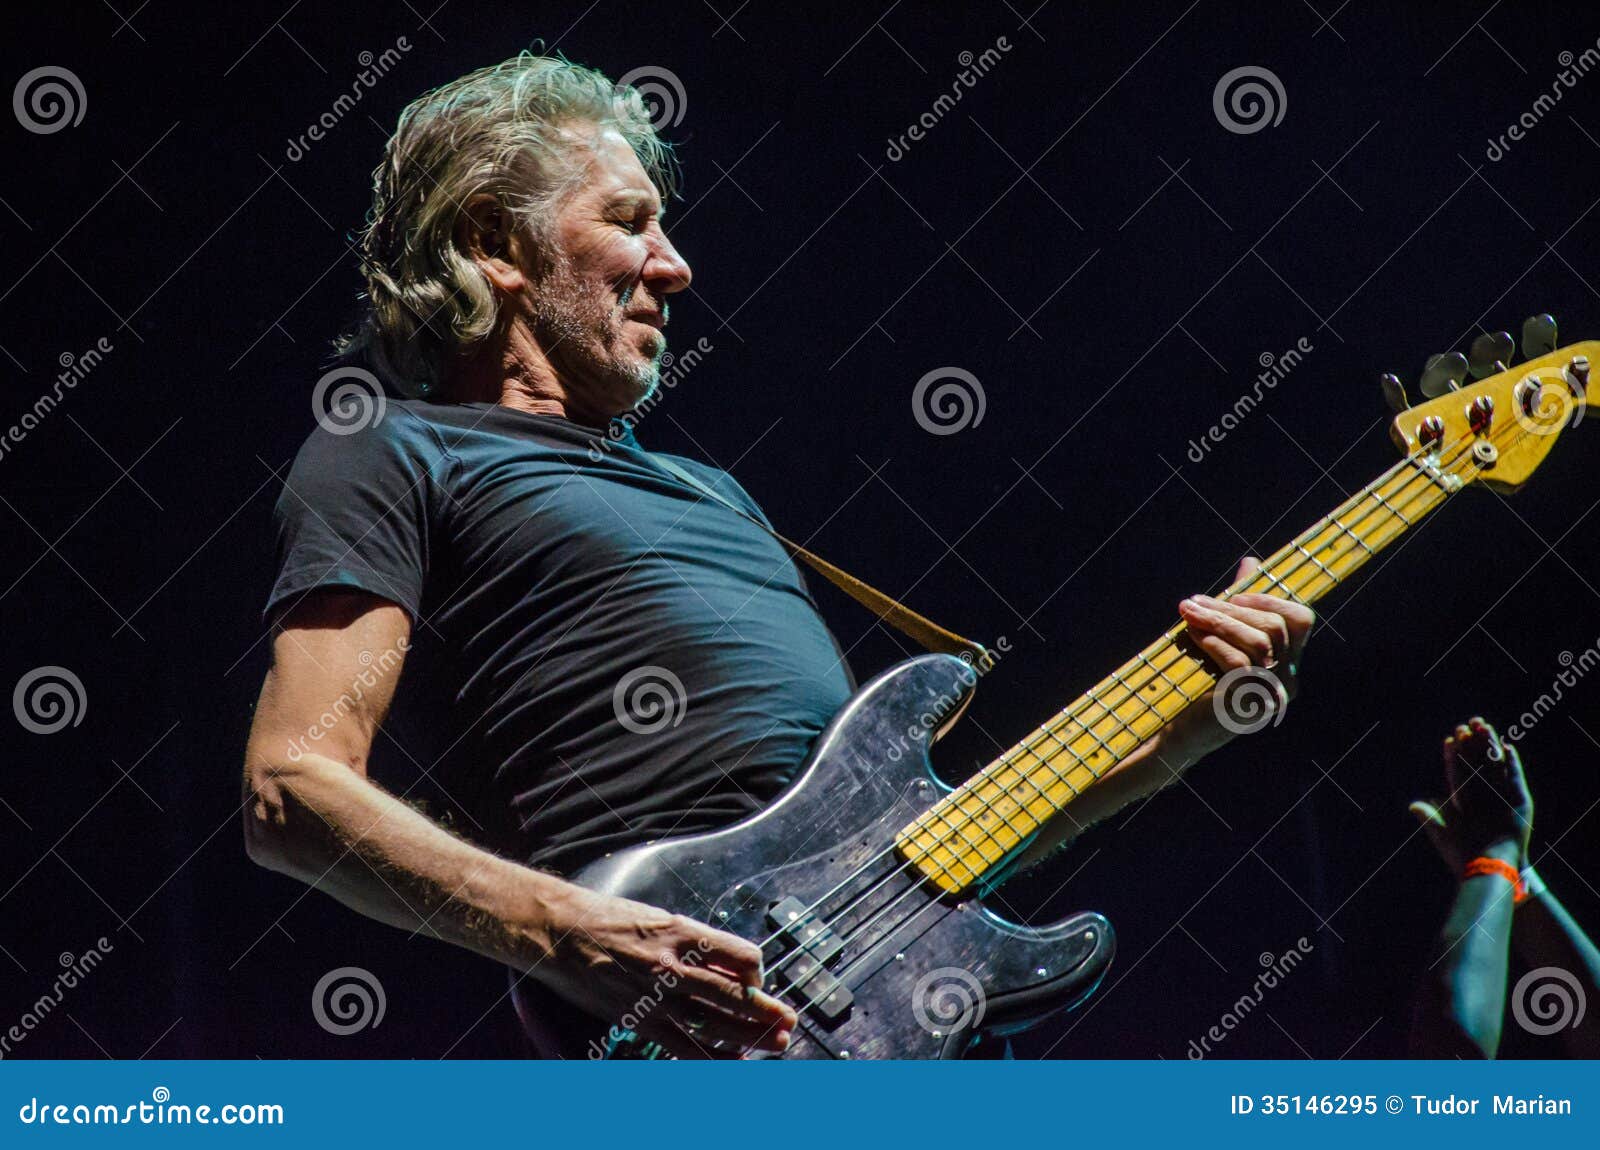 https://thumbs.dreamstime.com/z/roger-waters-bass-guitar-pink-floyd-touring-wall-live-show-35146295.jpg